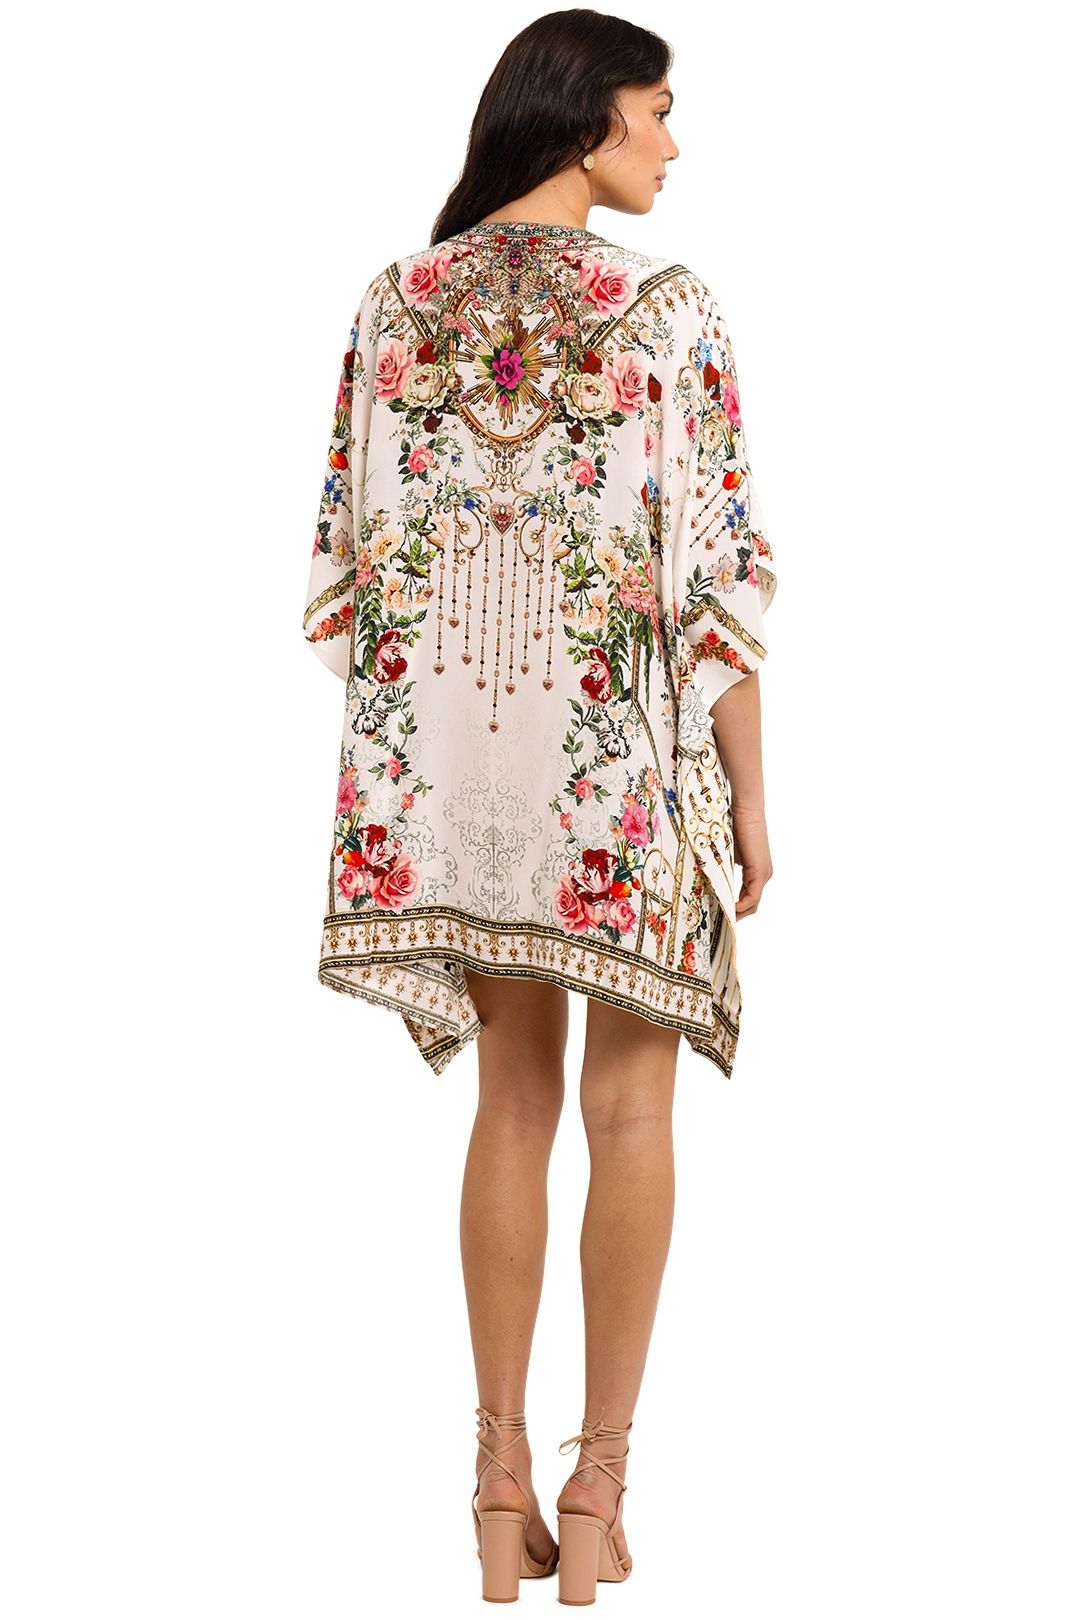 Camilla Short Lace Up Kaftan Star Crossed Lovers Floral